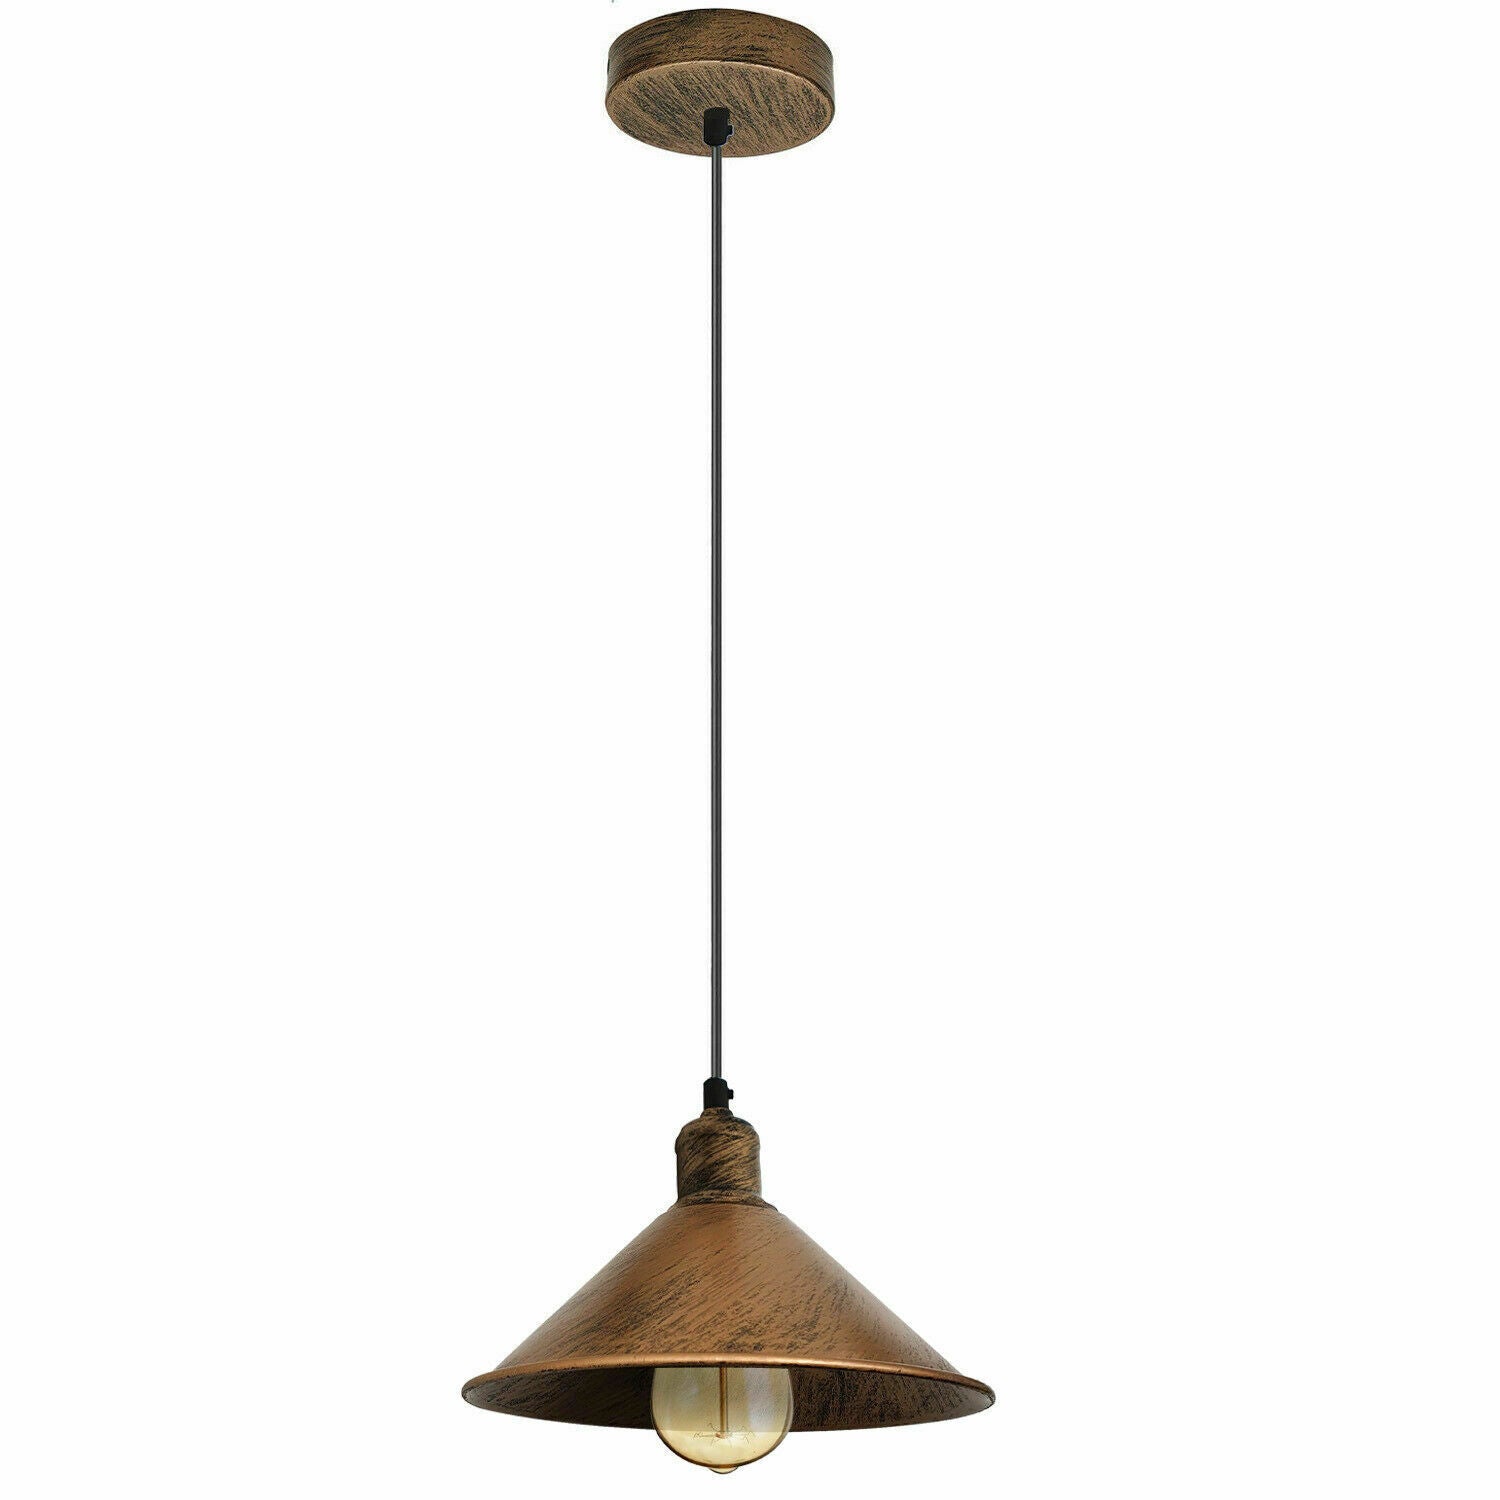 34 Inch Industrial Modern Cone Ceiling Pendant Lighting